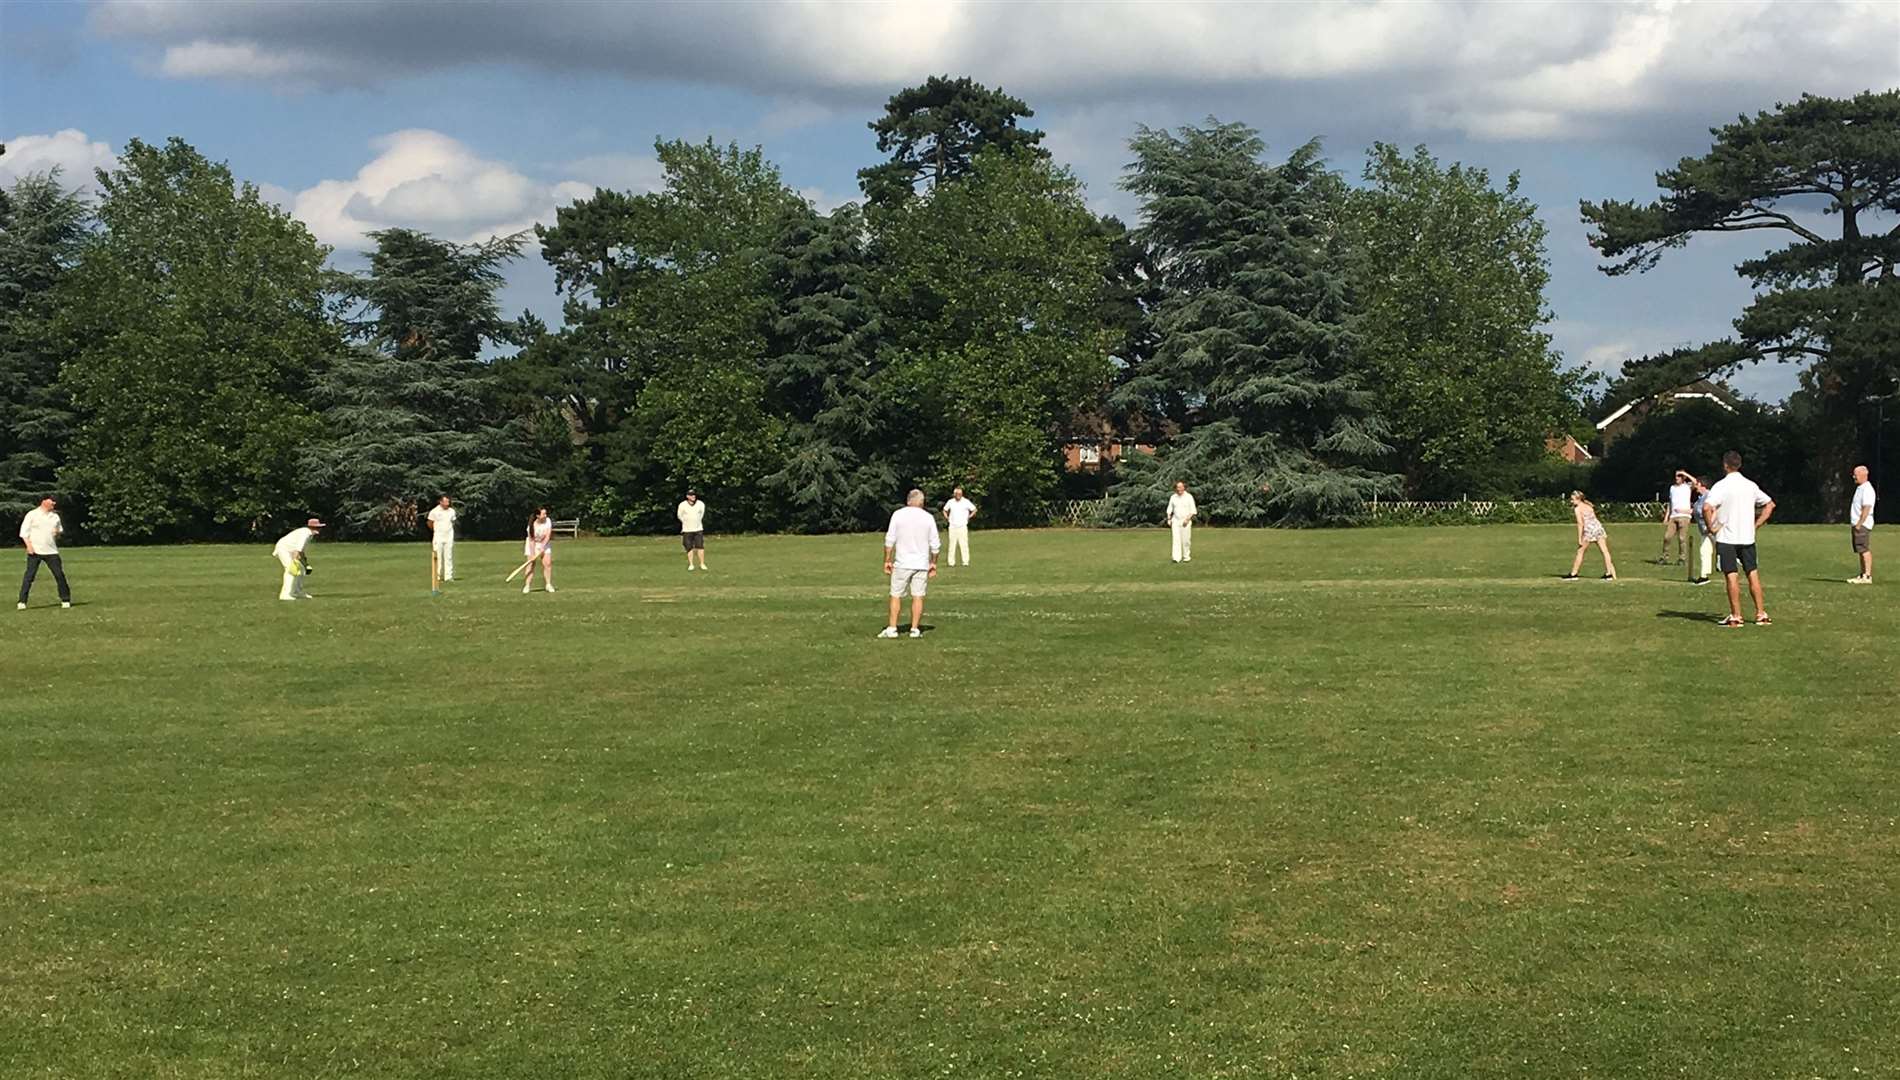 A cricket match on the Memorial Playing Field in happier times